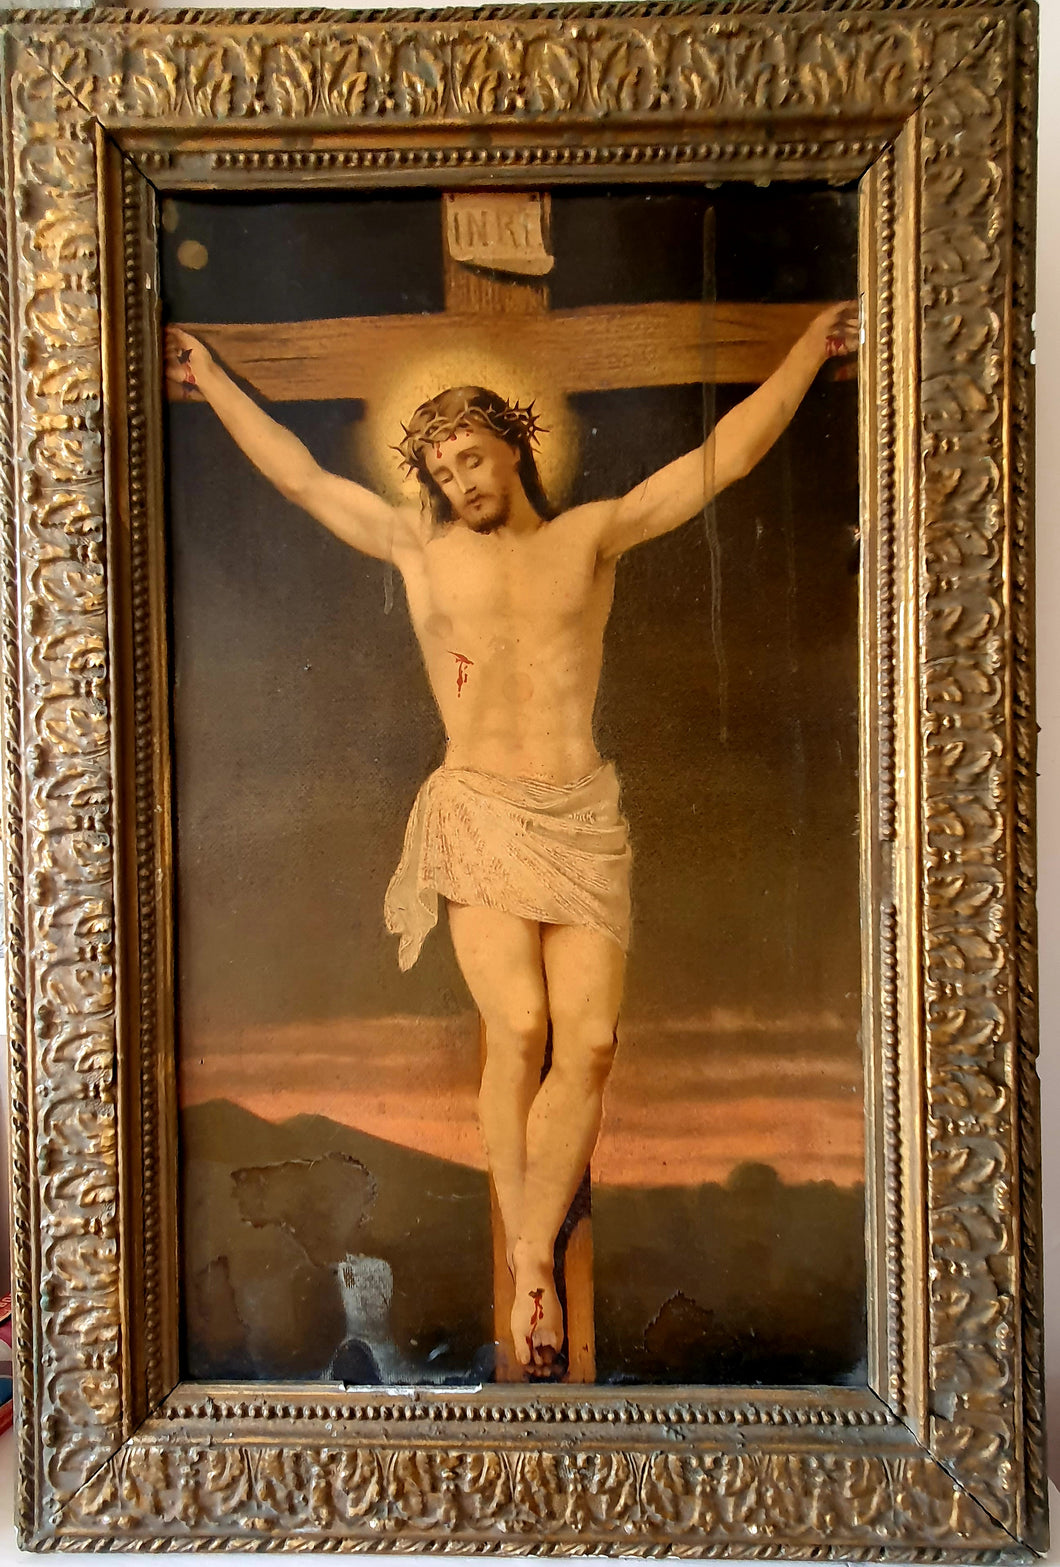 Vintage French gilded framed religious print of the crucifixion.